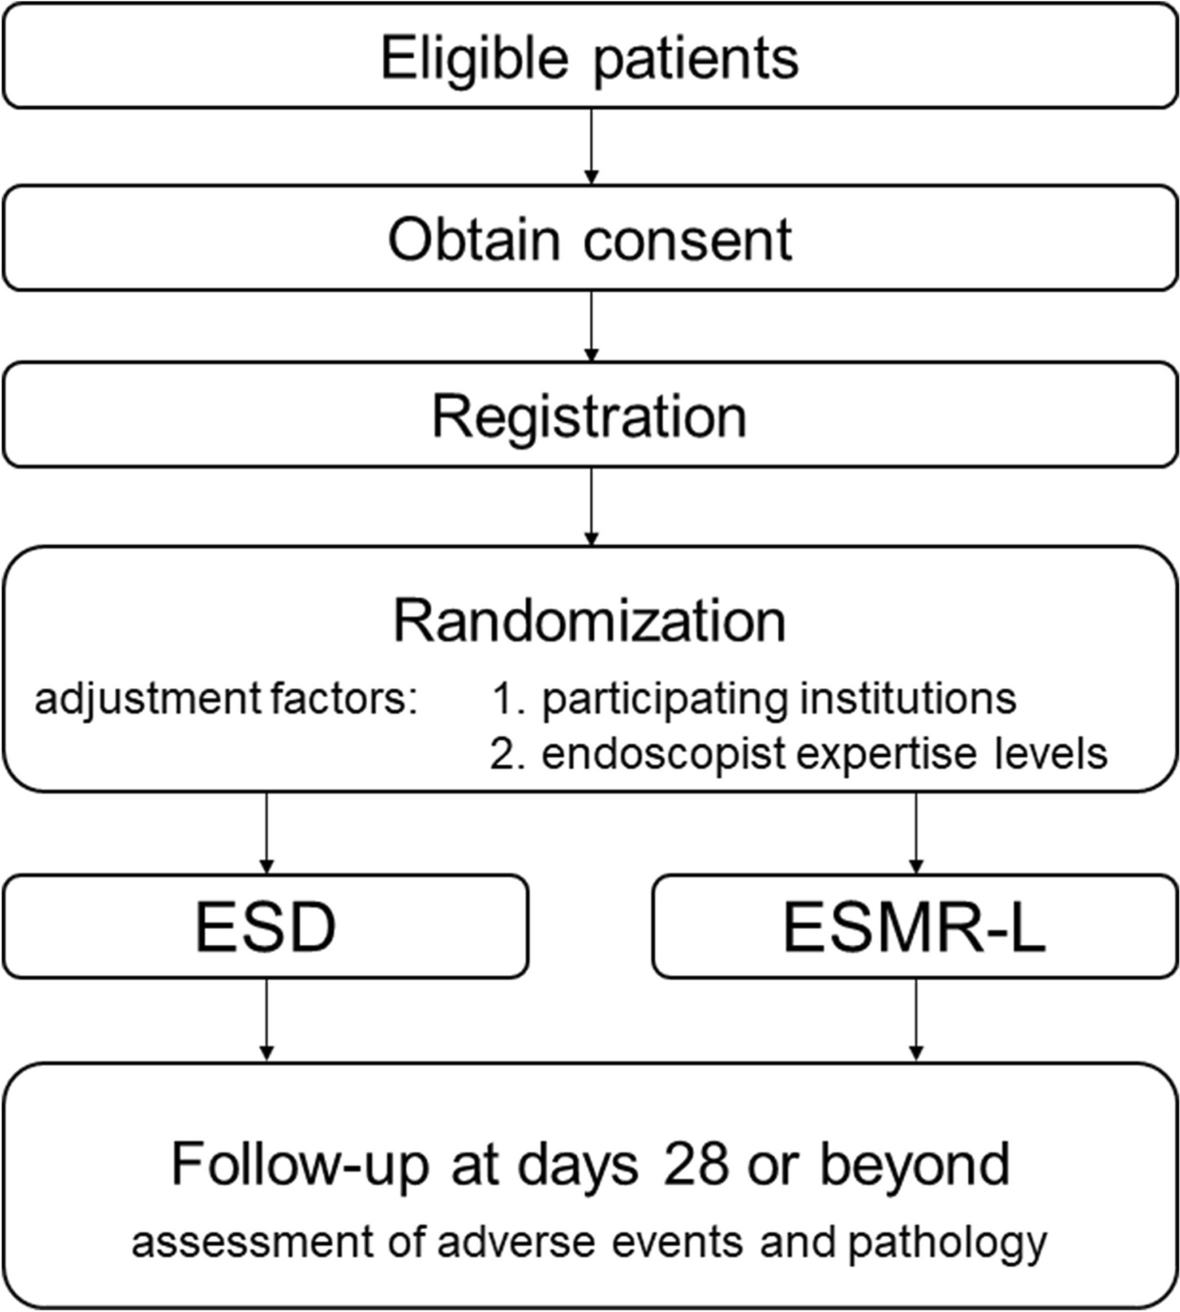 Efficacy of endoscopic submucosal resection with a ligation device for small rectal neuroendocrine tumor: study protocol of a multicenter open-label randomized control trial (BANDIT trial)